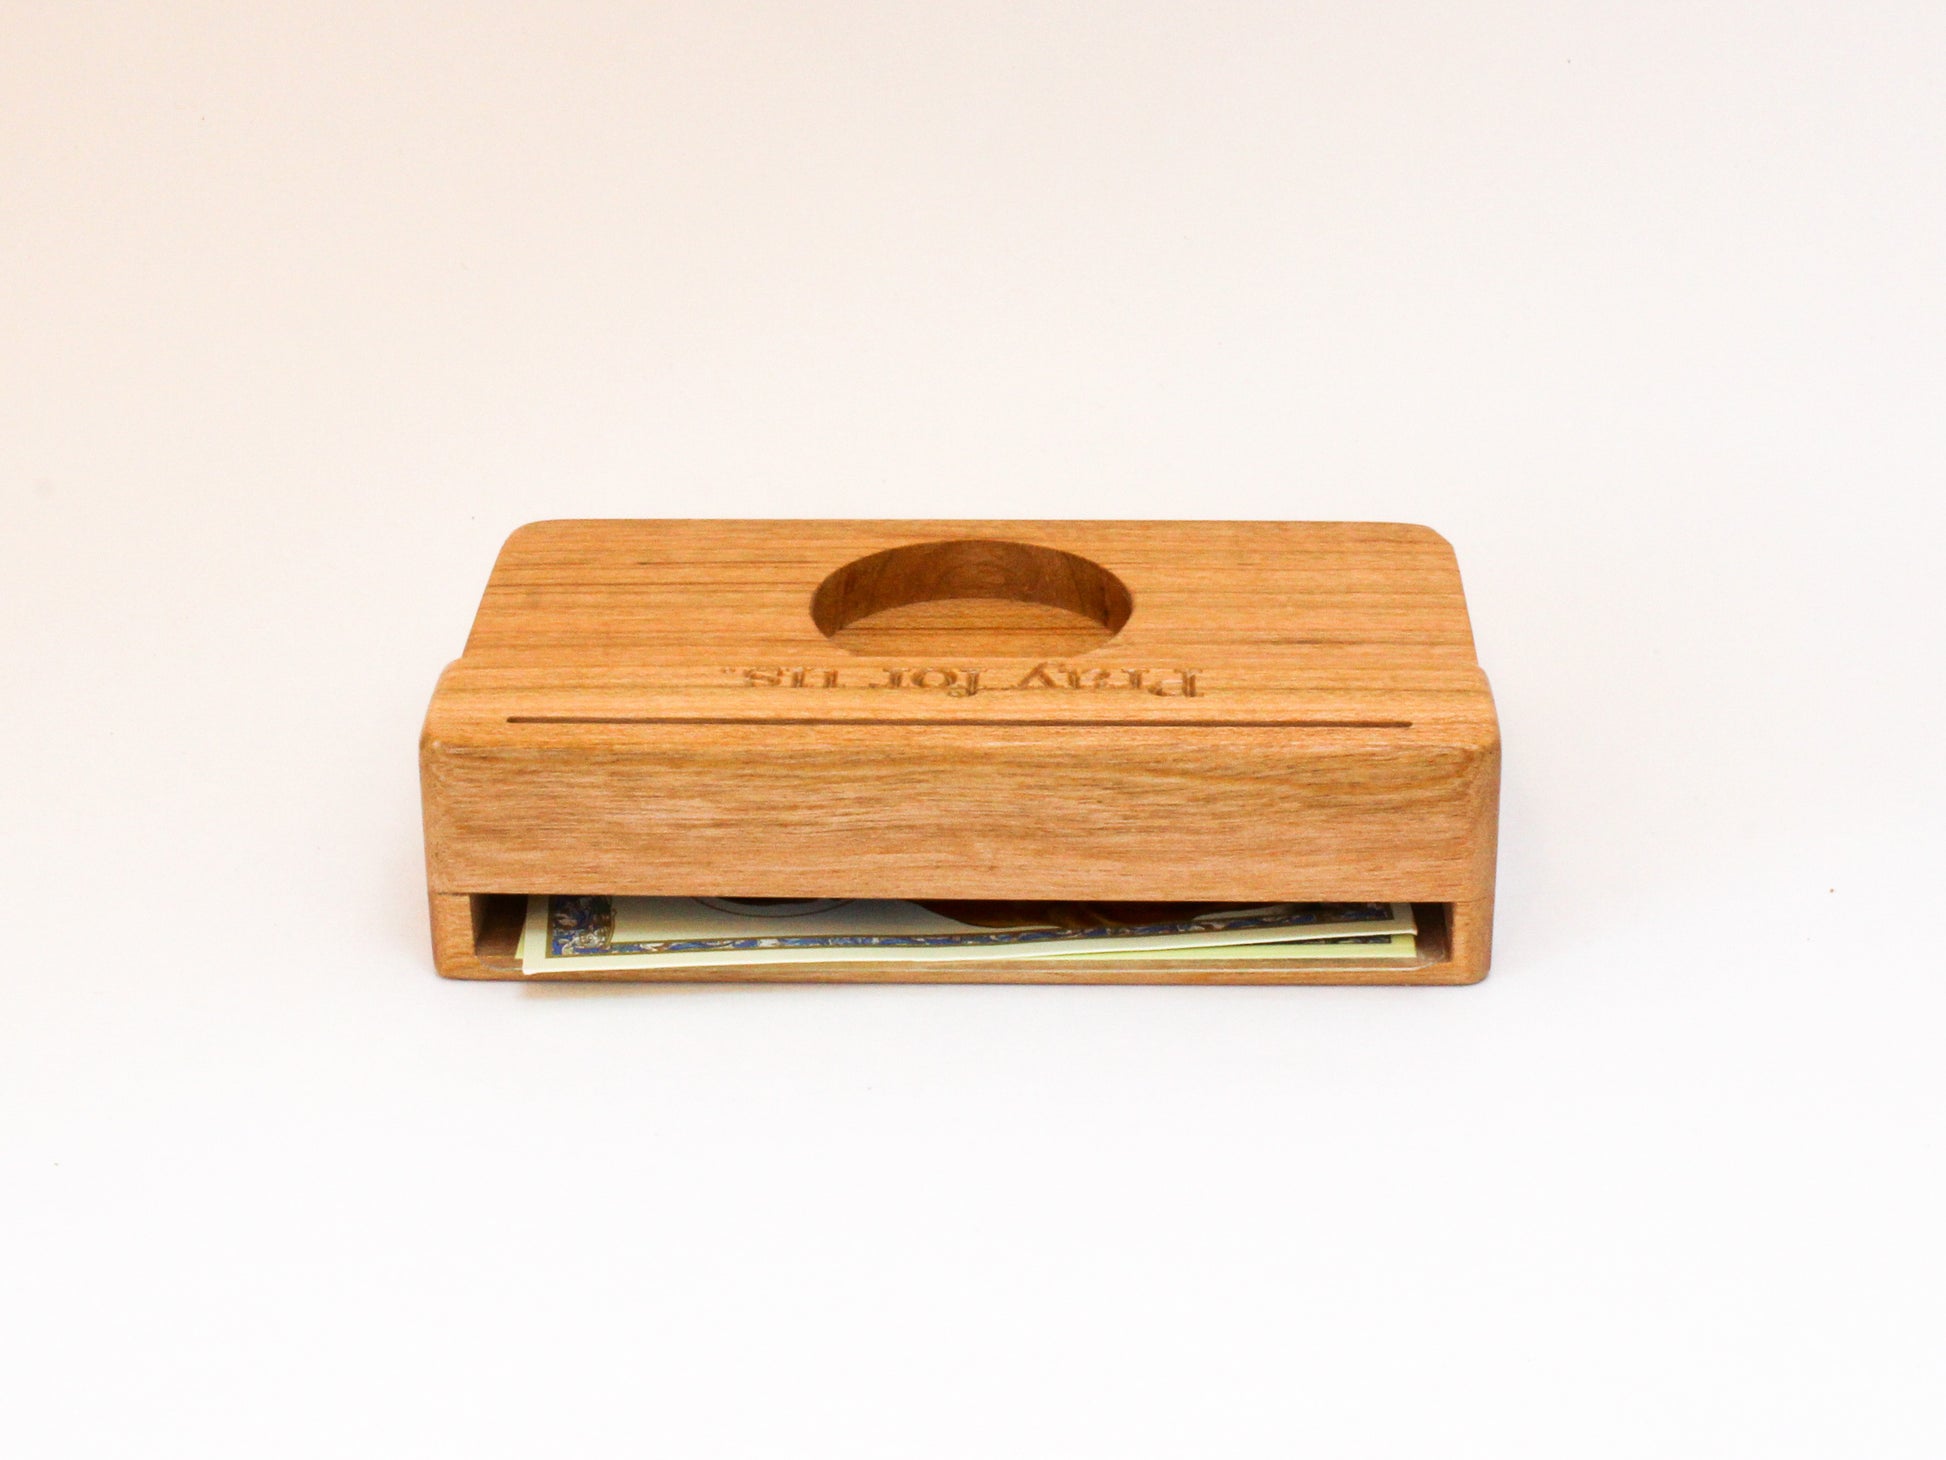 Back view of prayer card holder showing storage space for extra prayer cards